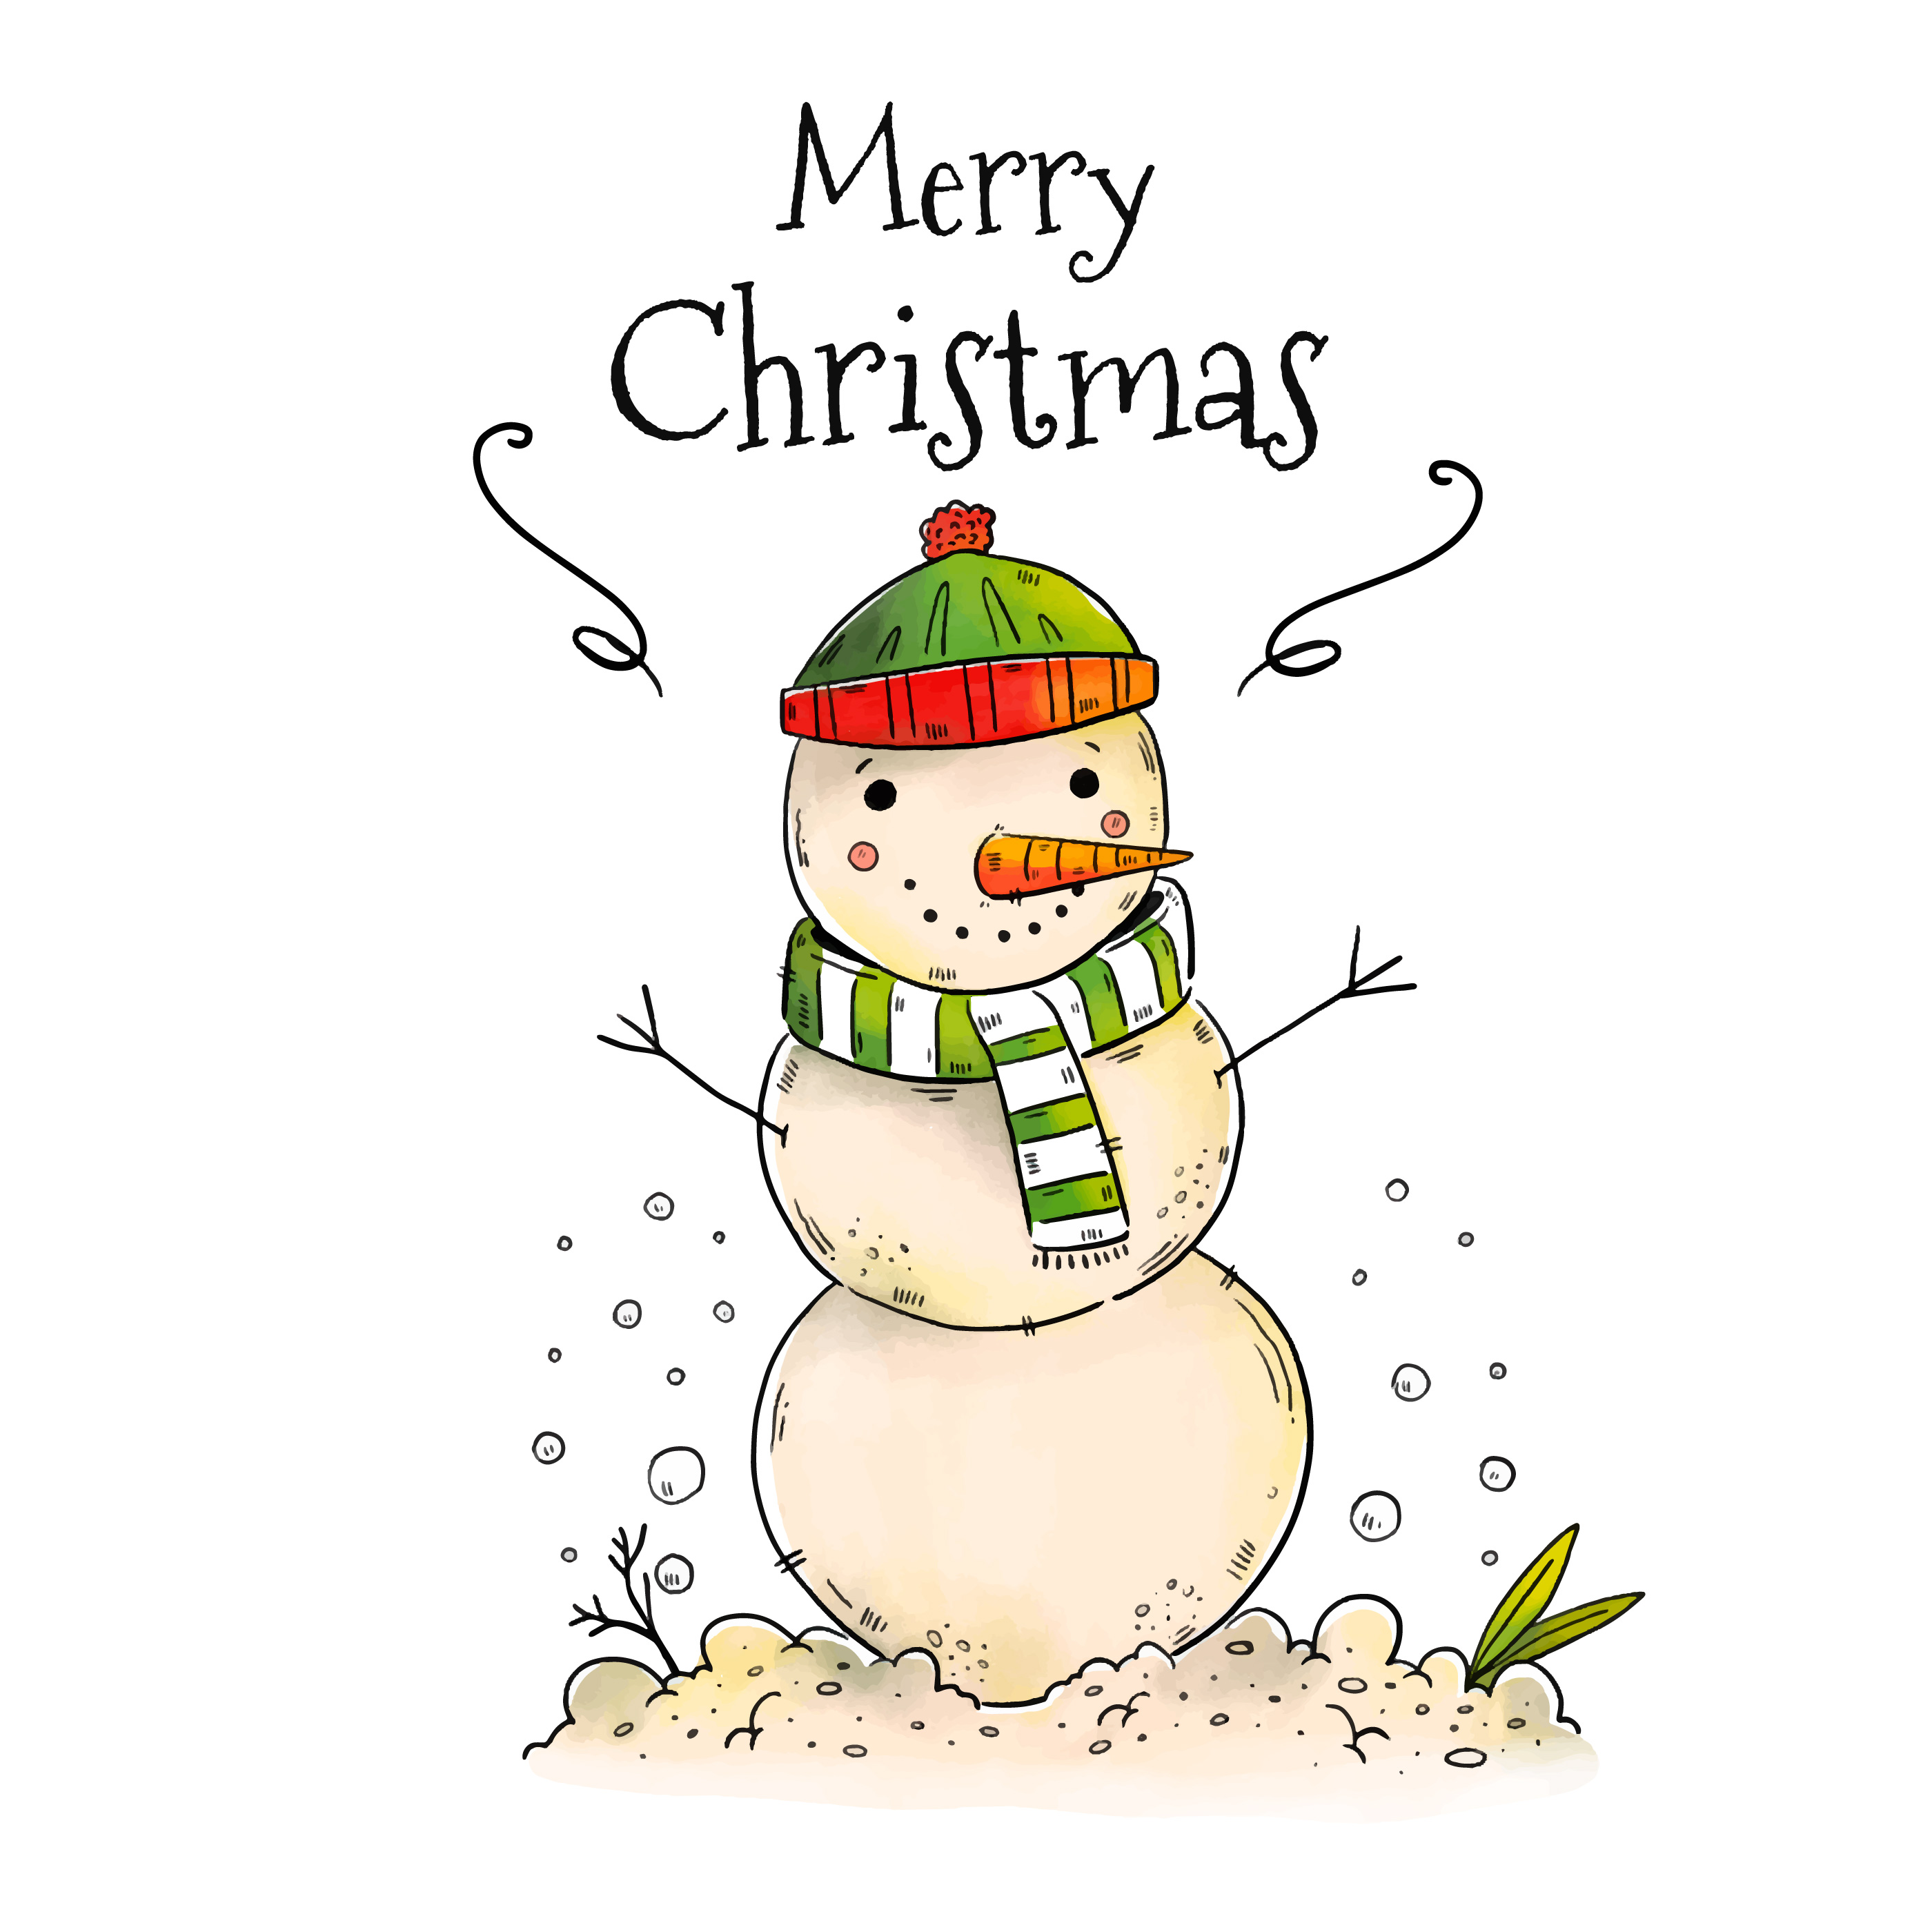 Cute Snowman Christmas With Snow - Download Free Vectors ...